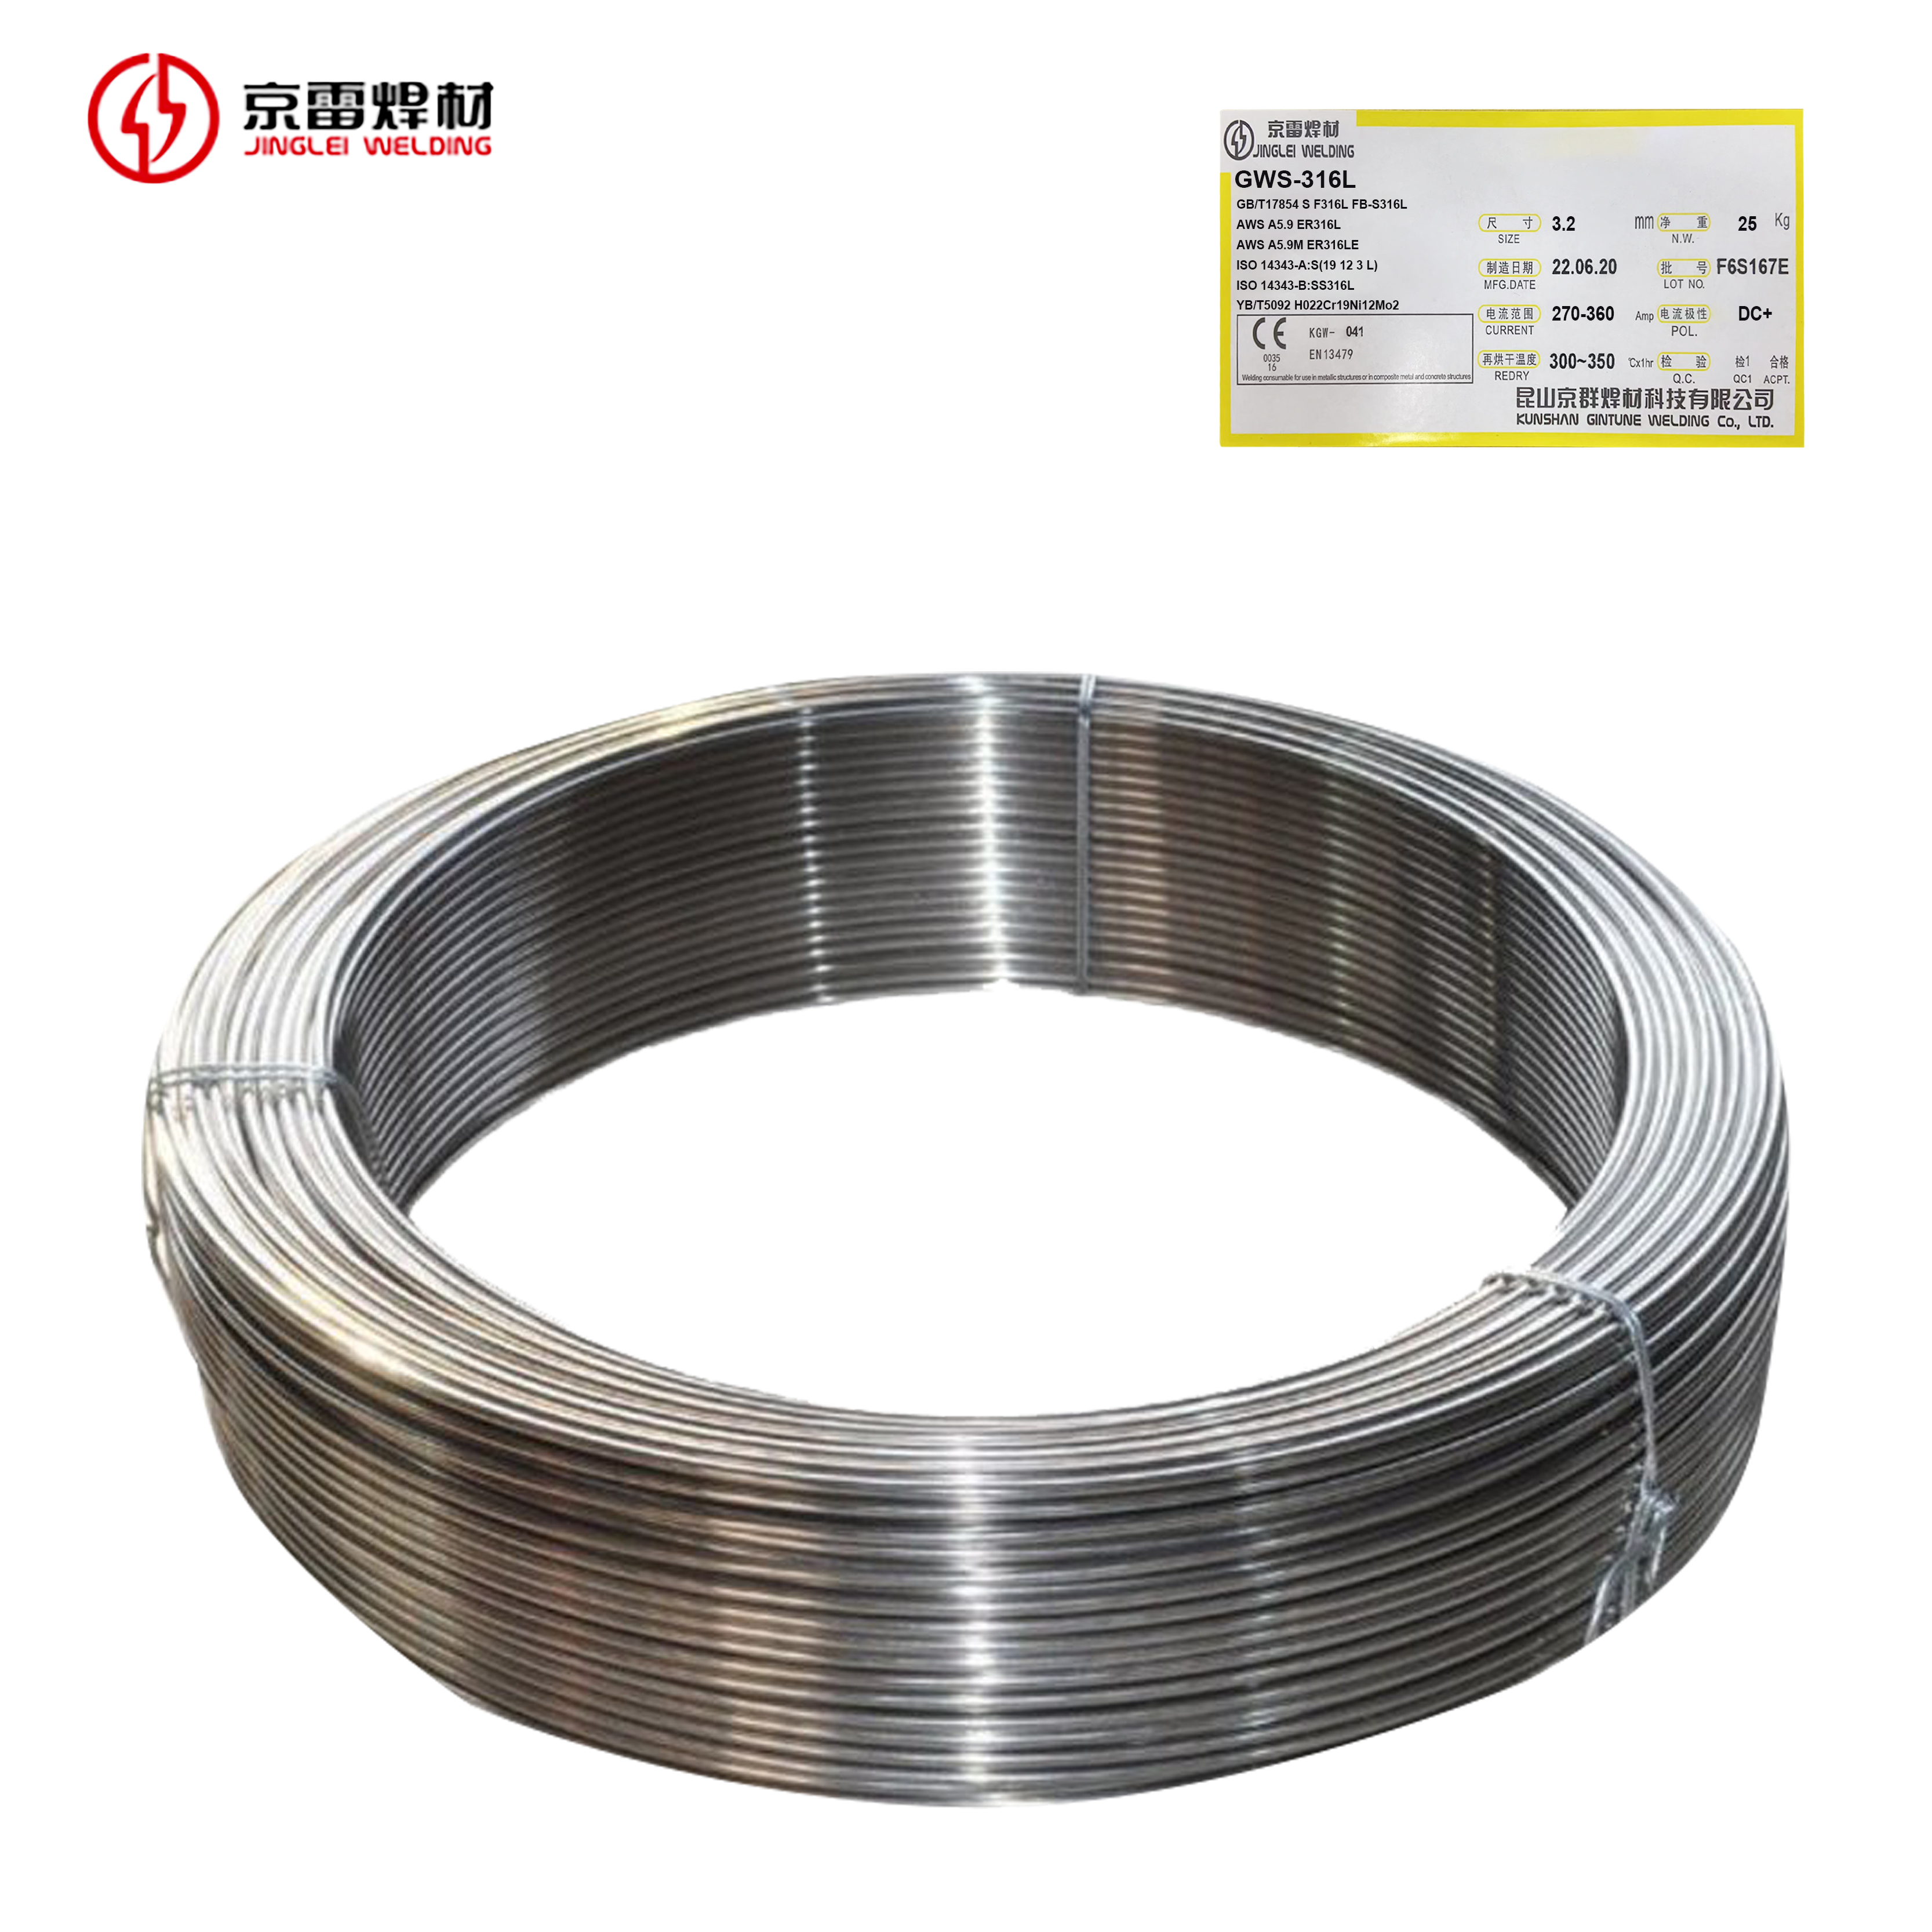 Stainless steels SAW welding wire ER316L and flux Welding makings